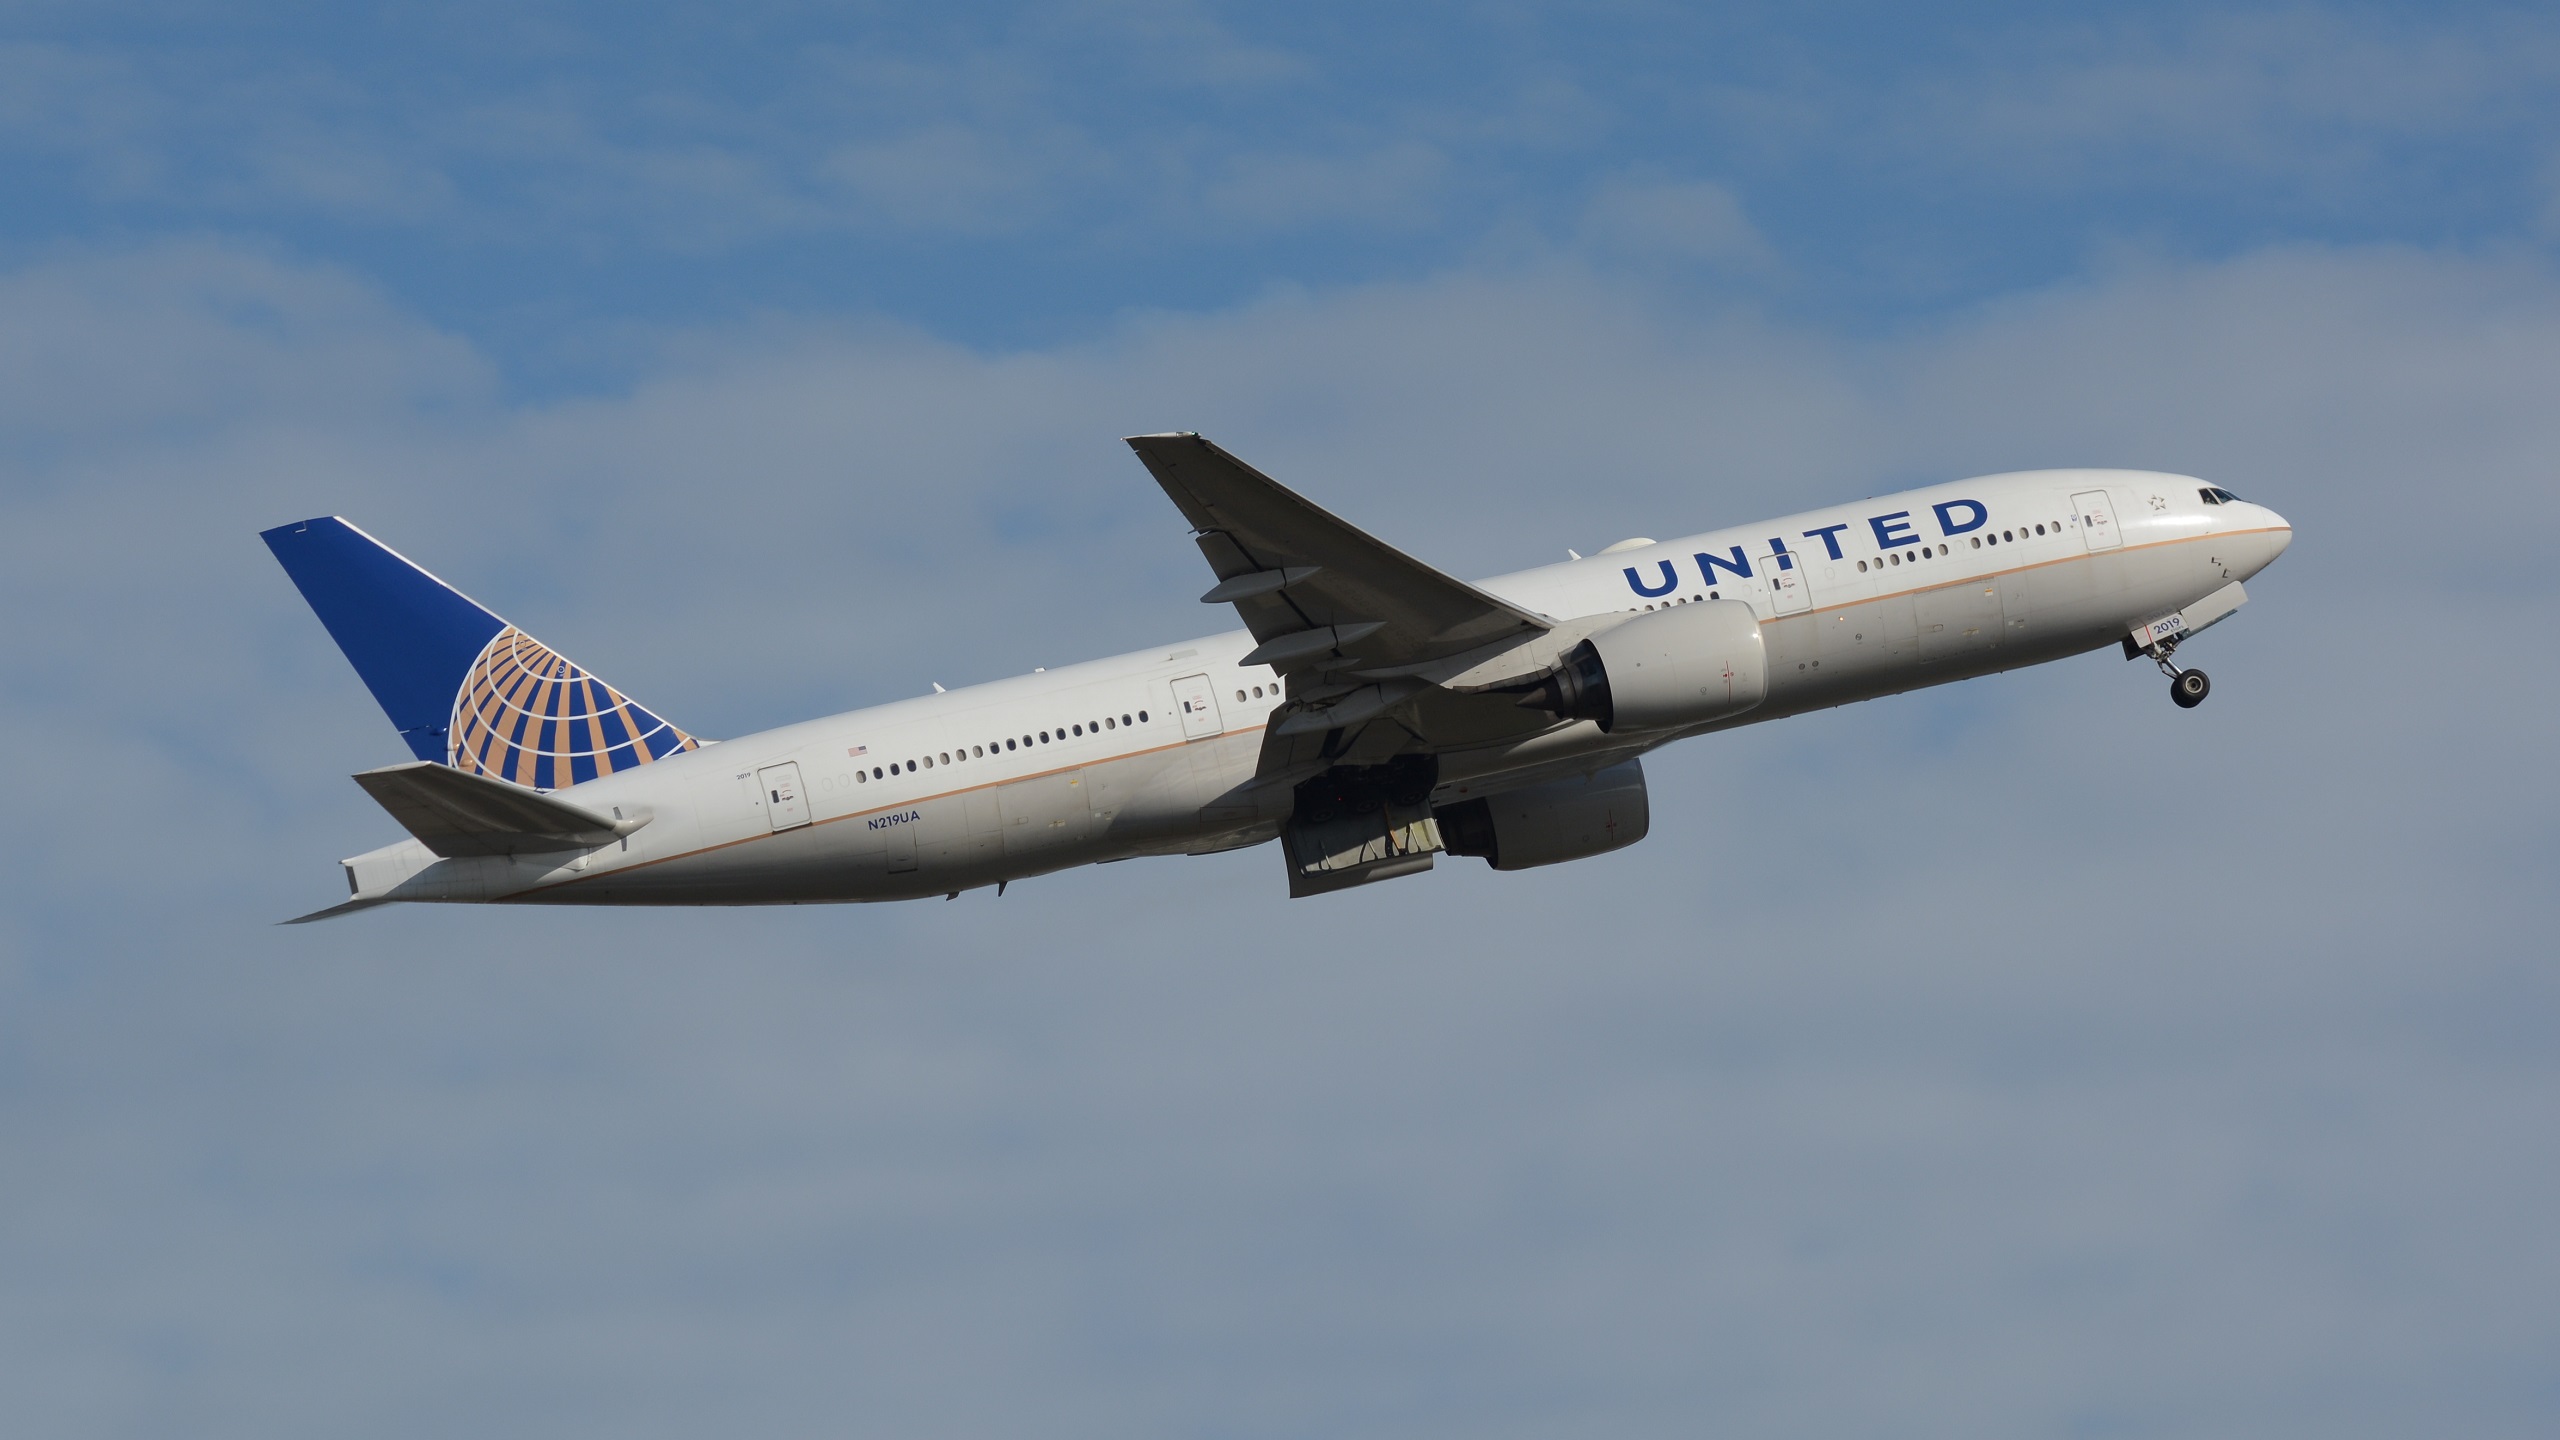 vehicles, boeing 777, aircraft, airplane, boeing, united airlines